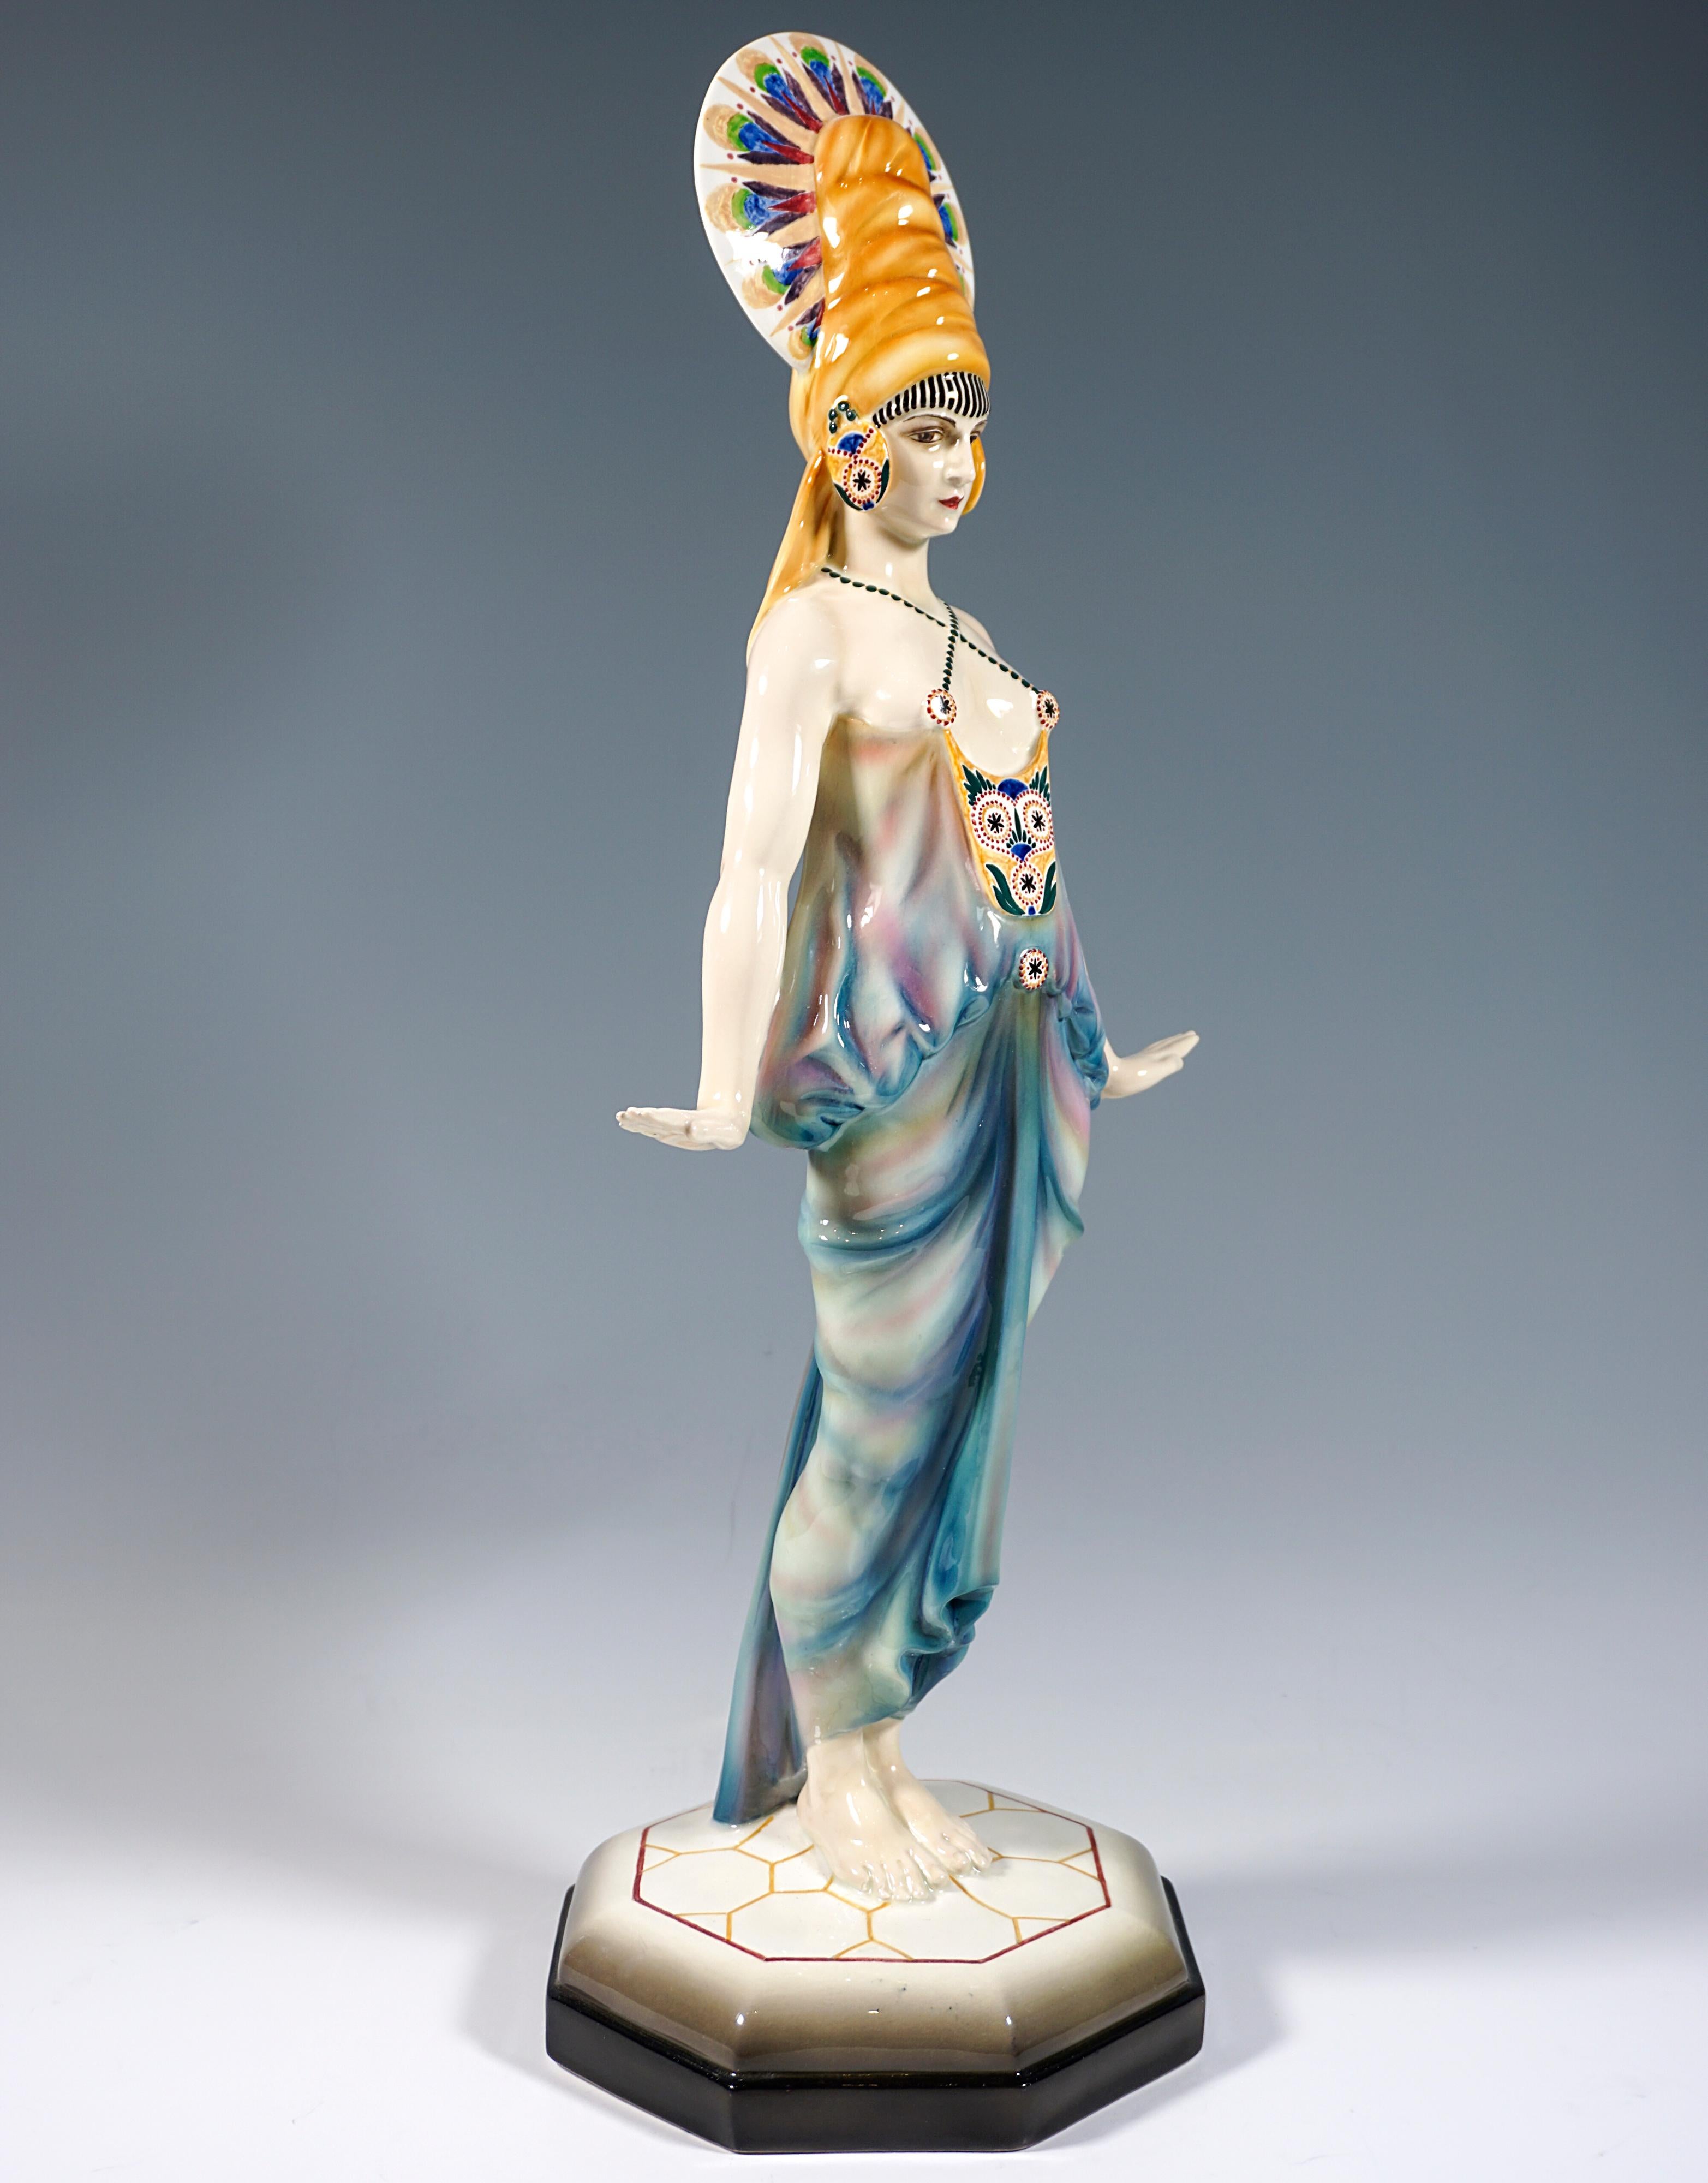 Exceptional Art Déco model of the Goldscheider company, which was executed only extremely rarely, and does not appear in the catalog of works:

Dancer posing upright with elaborate headdress in exotic costume softly embracing the body: Top attached